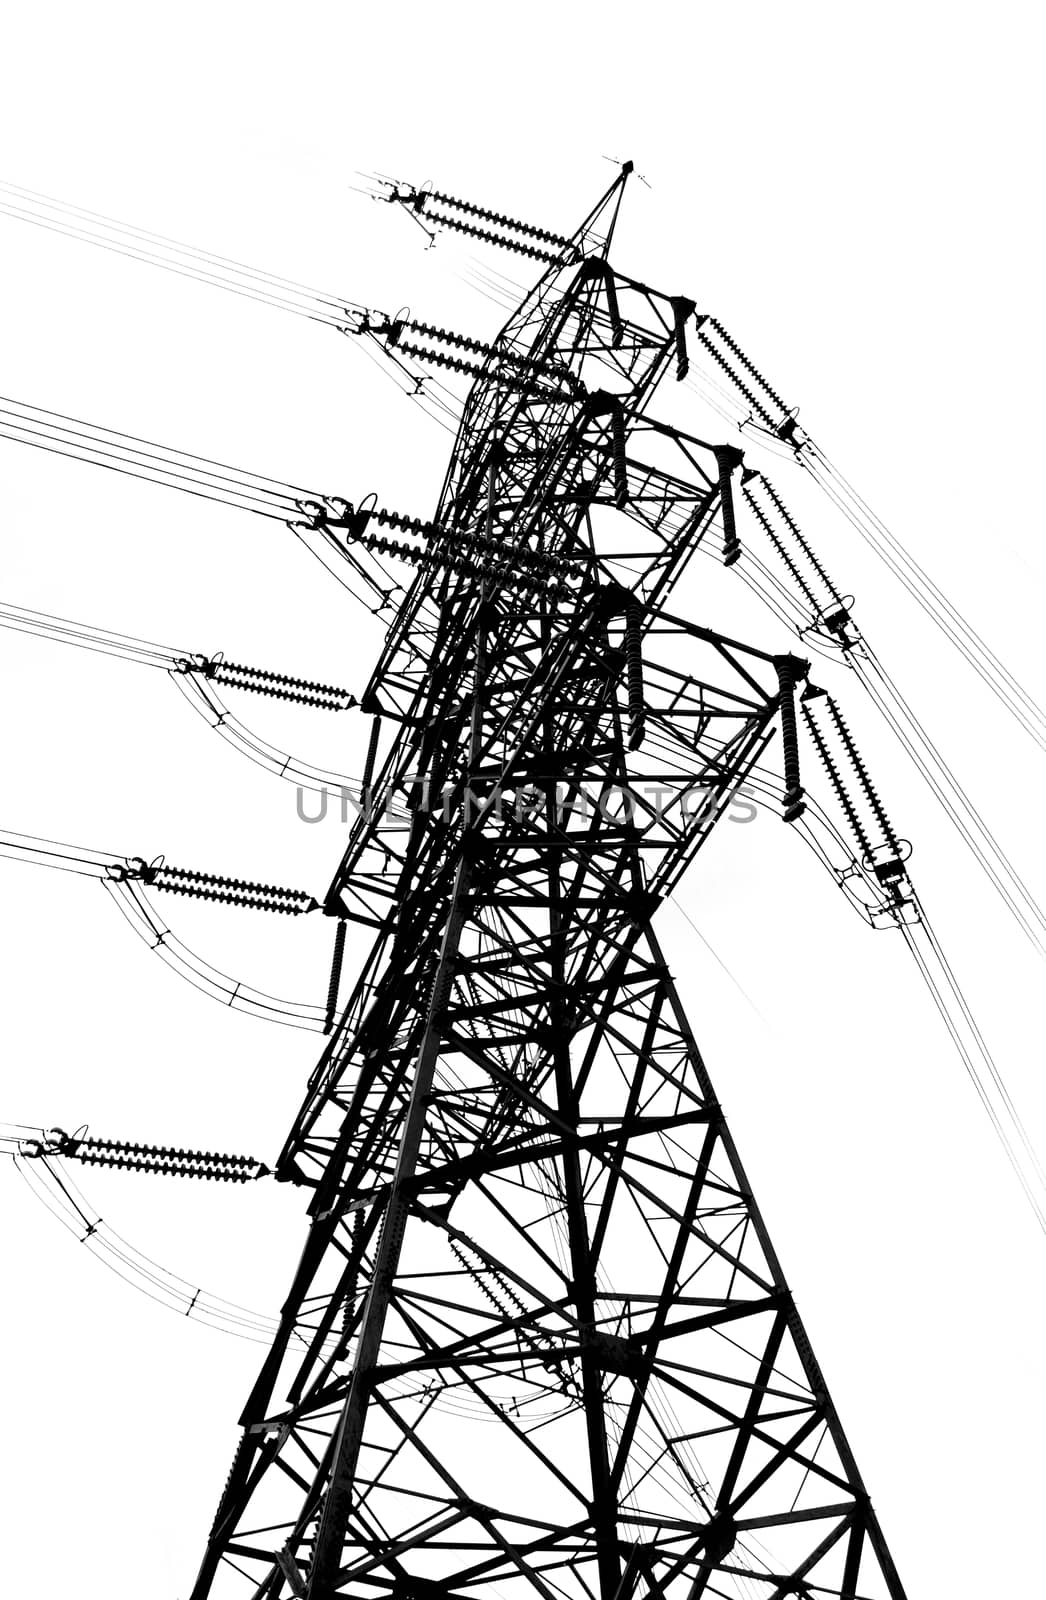 A large electricity transmission pylon seen in outline
